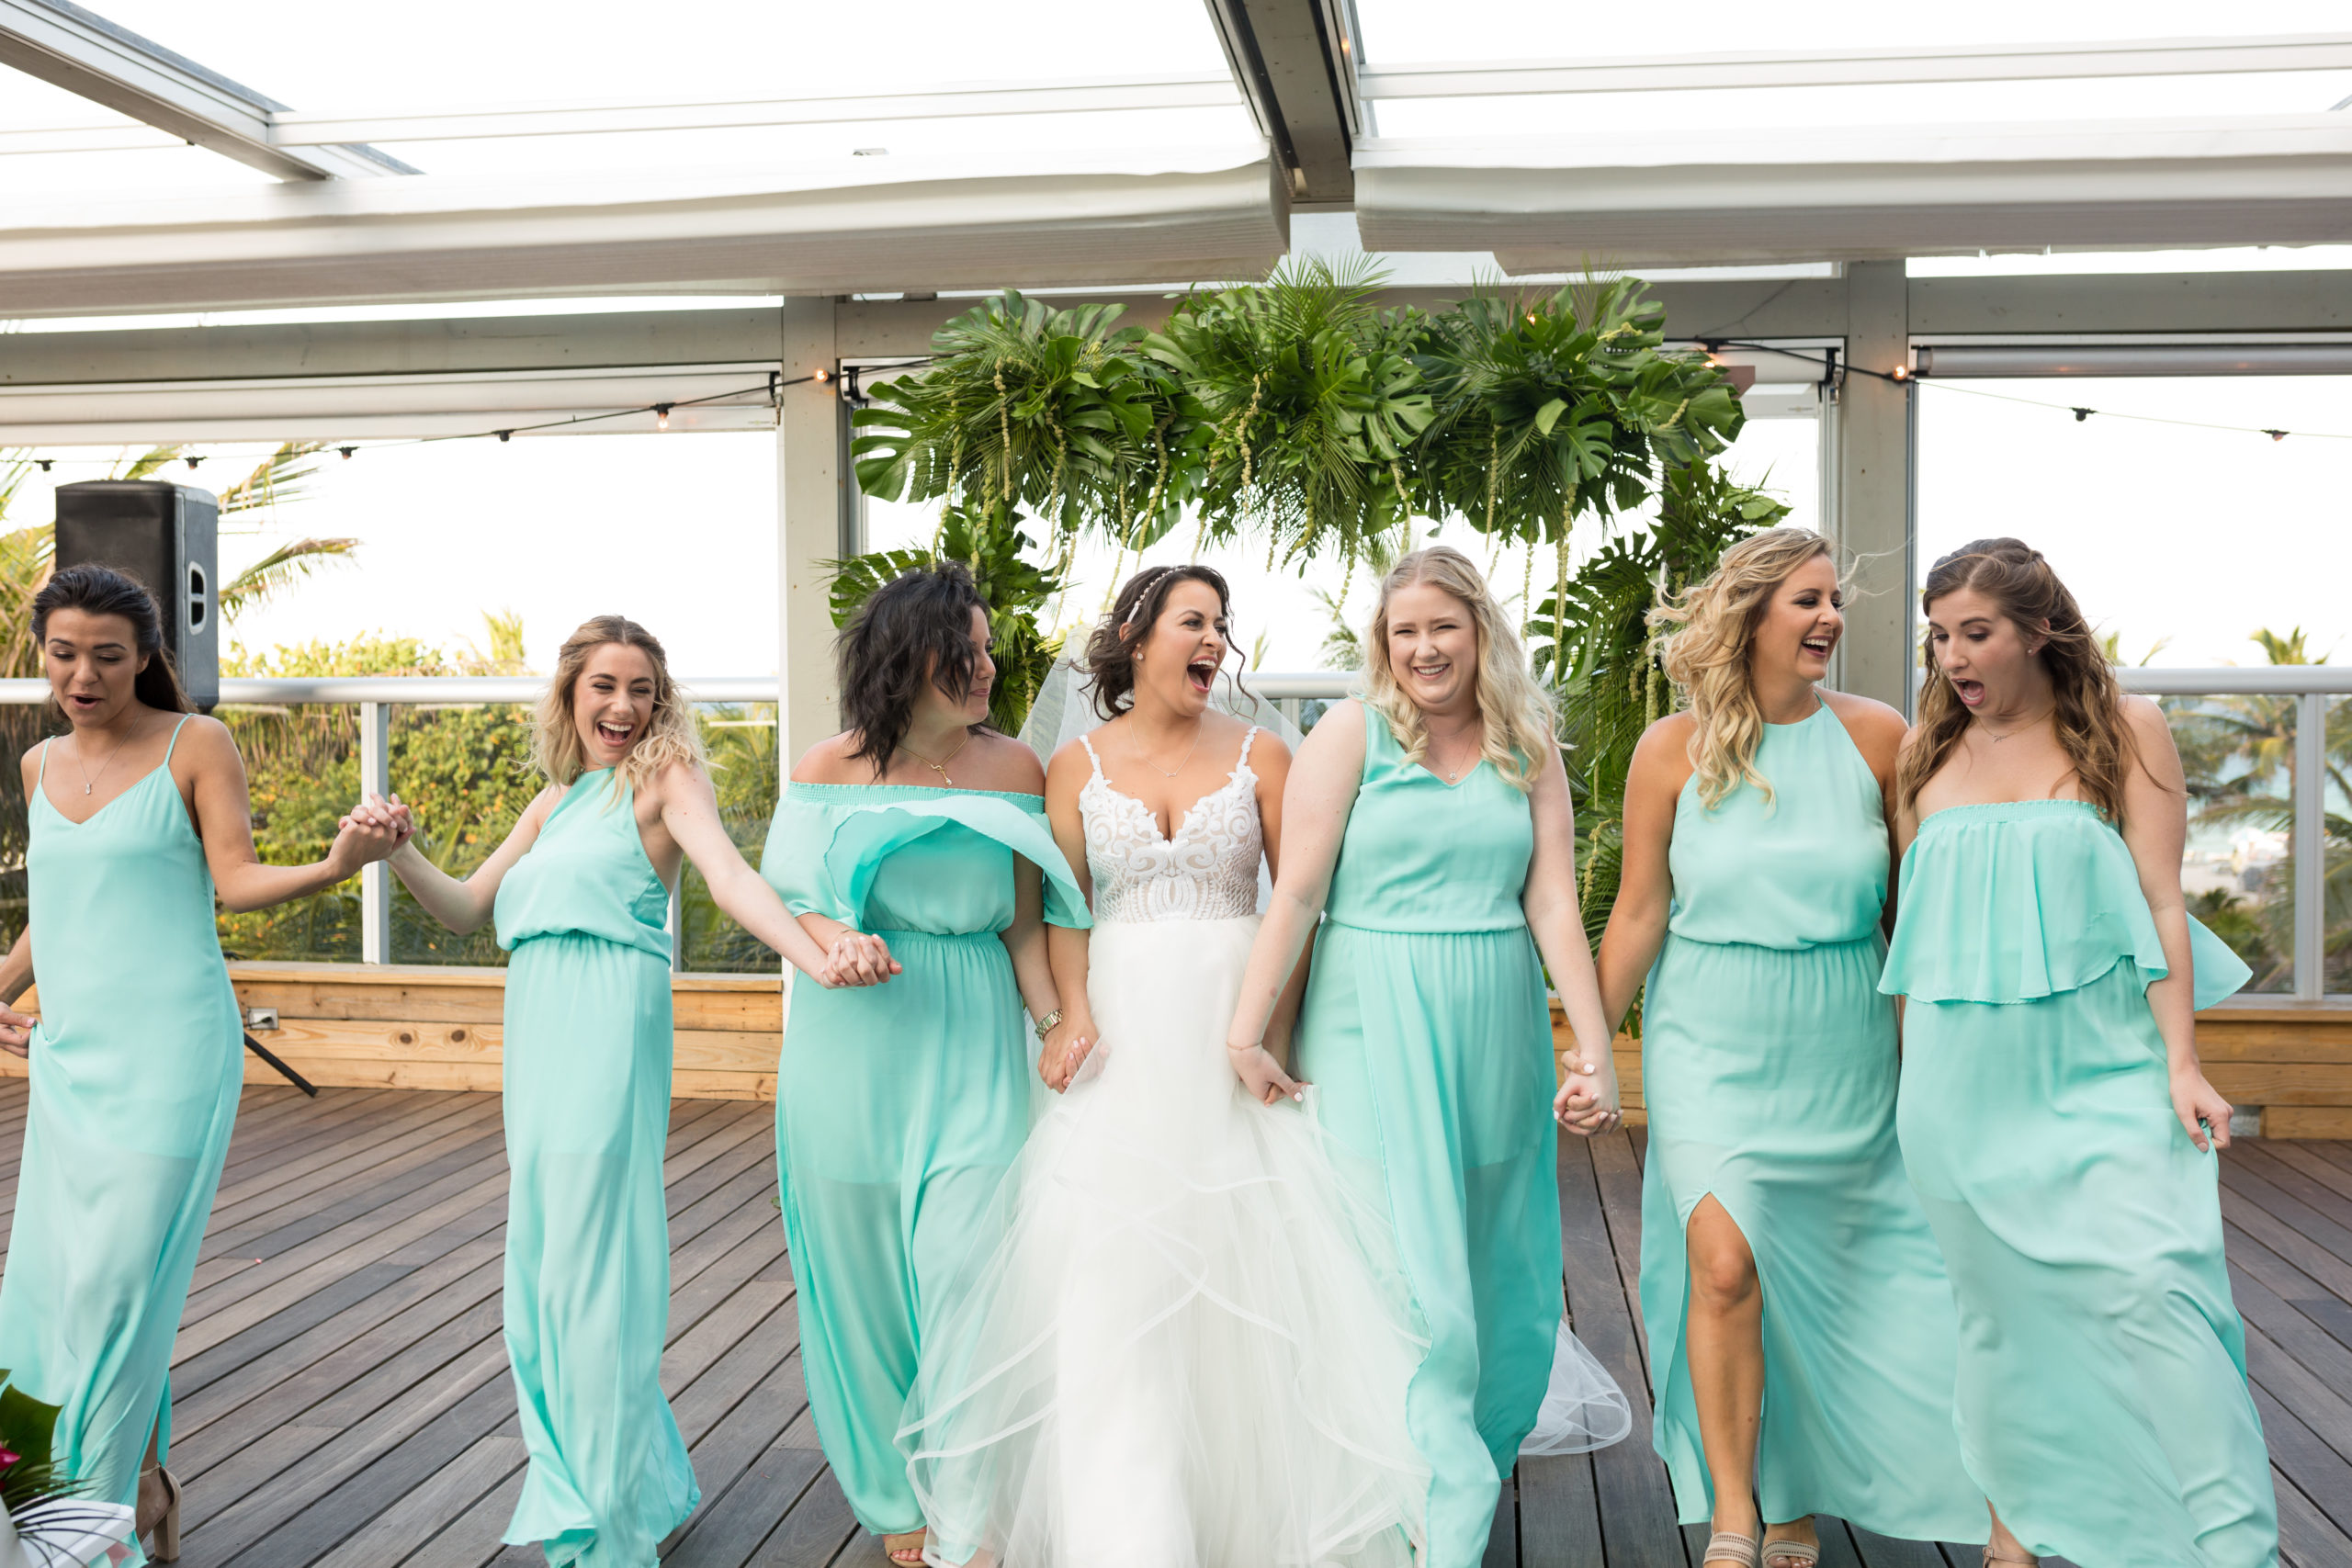 The bride and her bridesmaids walking holding hands in seafoam mint bridesmaids dresses